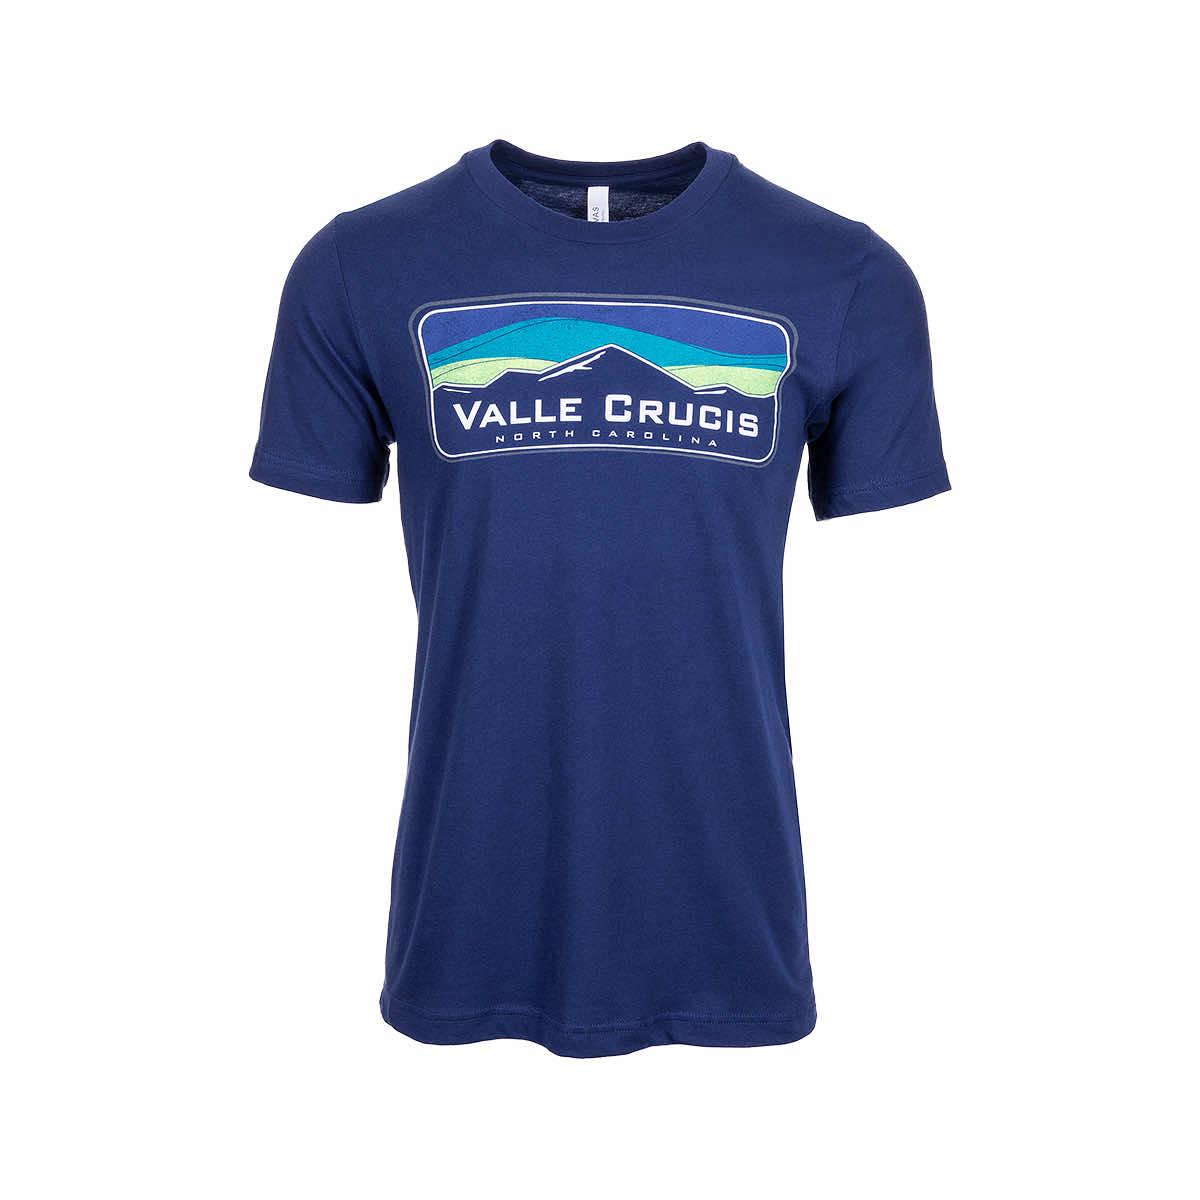  Valle Crucis Mountain Candy Short Sleeve T- Shirt